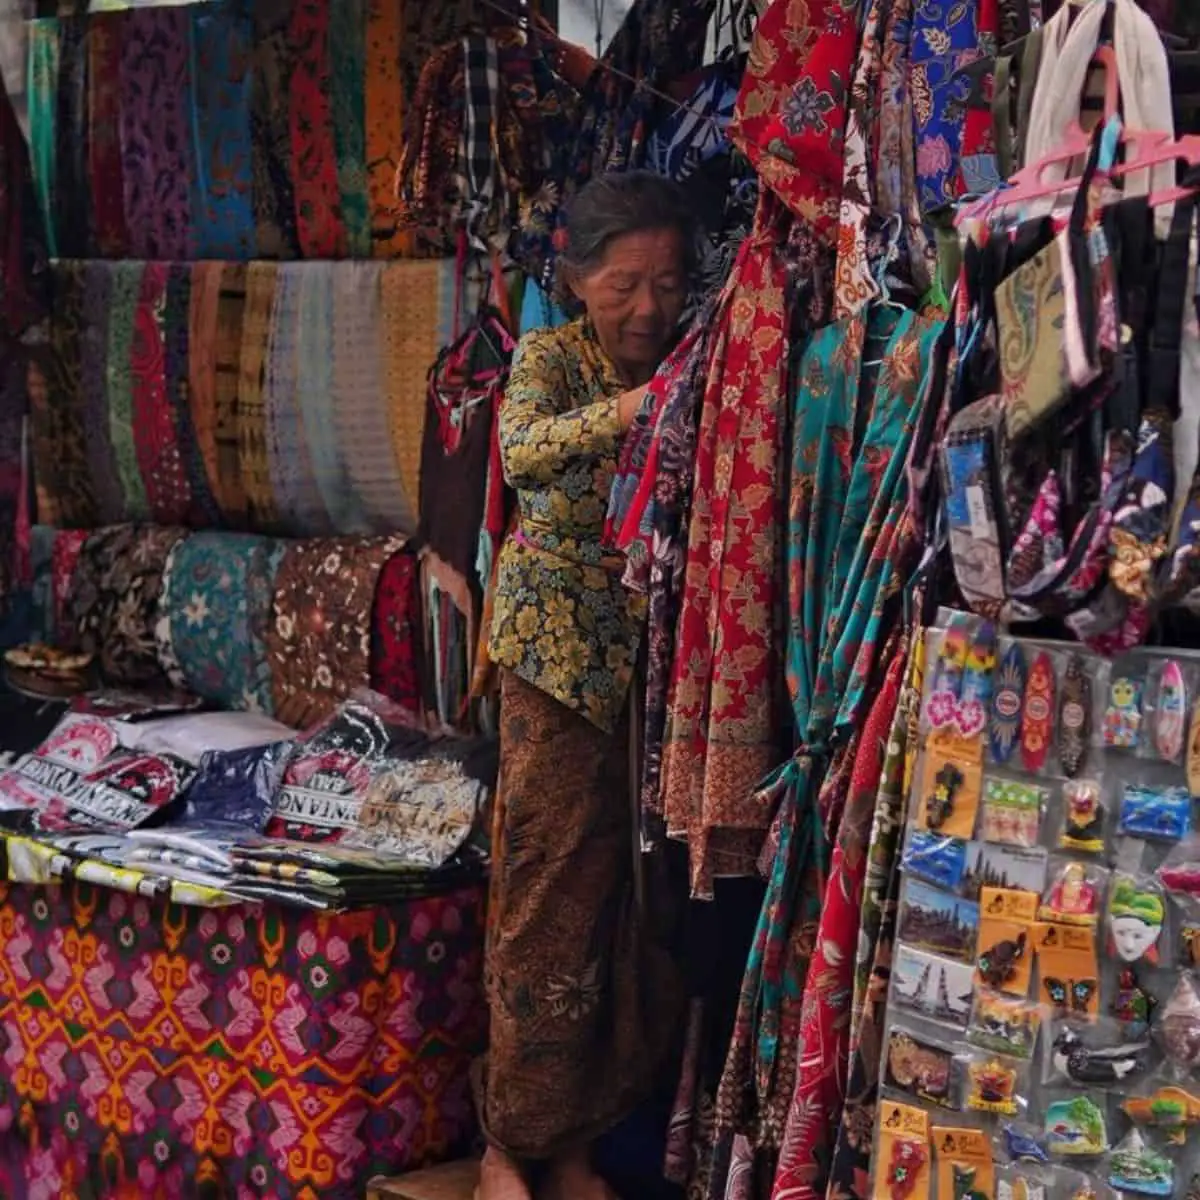 Old woman arranging the patterned sarongs in Ubud Market